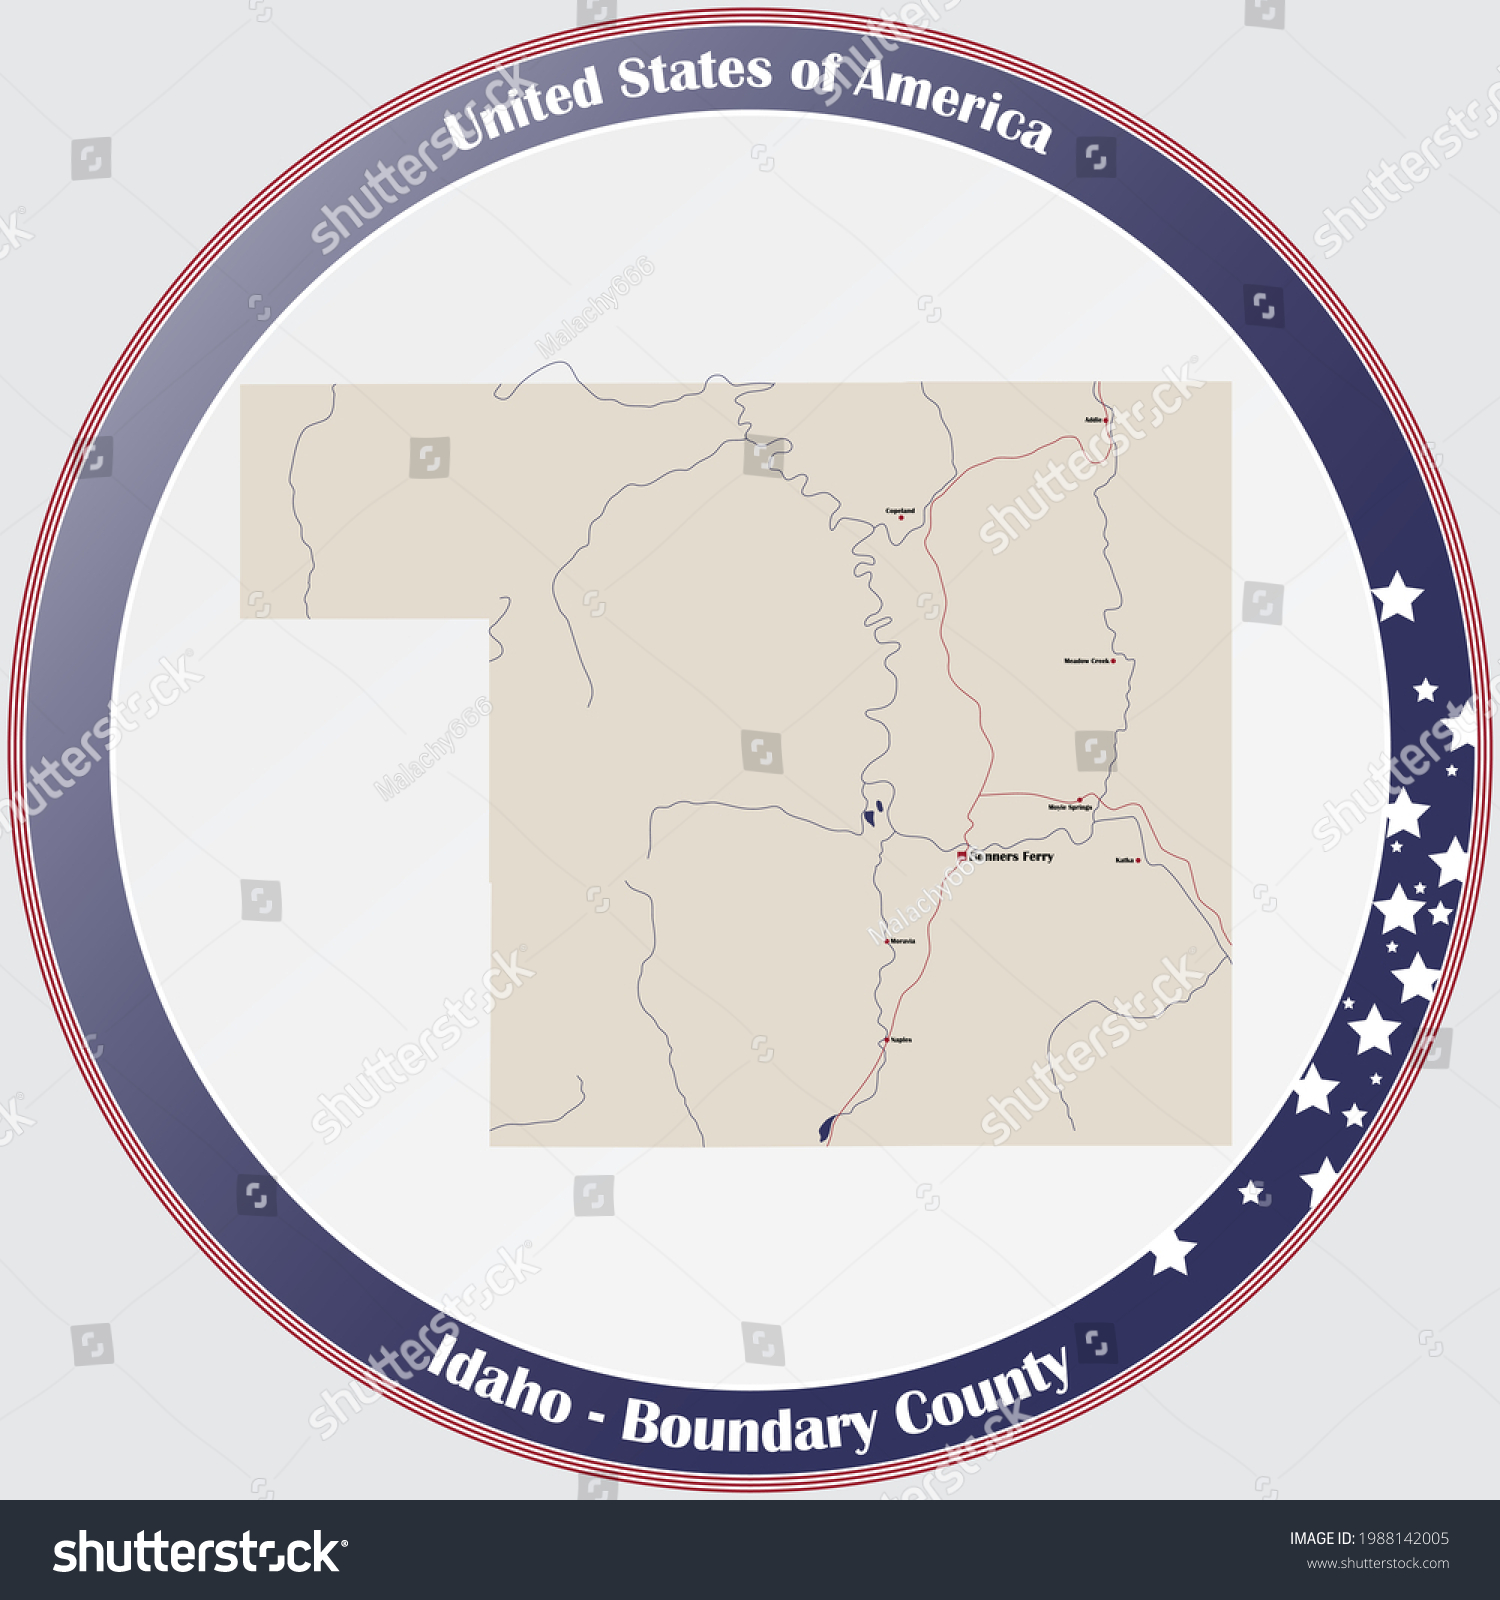 Stock Vector Large And Detailed Map Of Boundary County In Idaho Usa 1988142005 